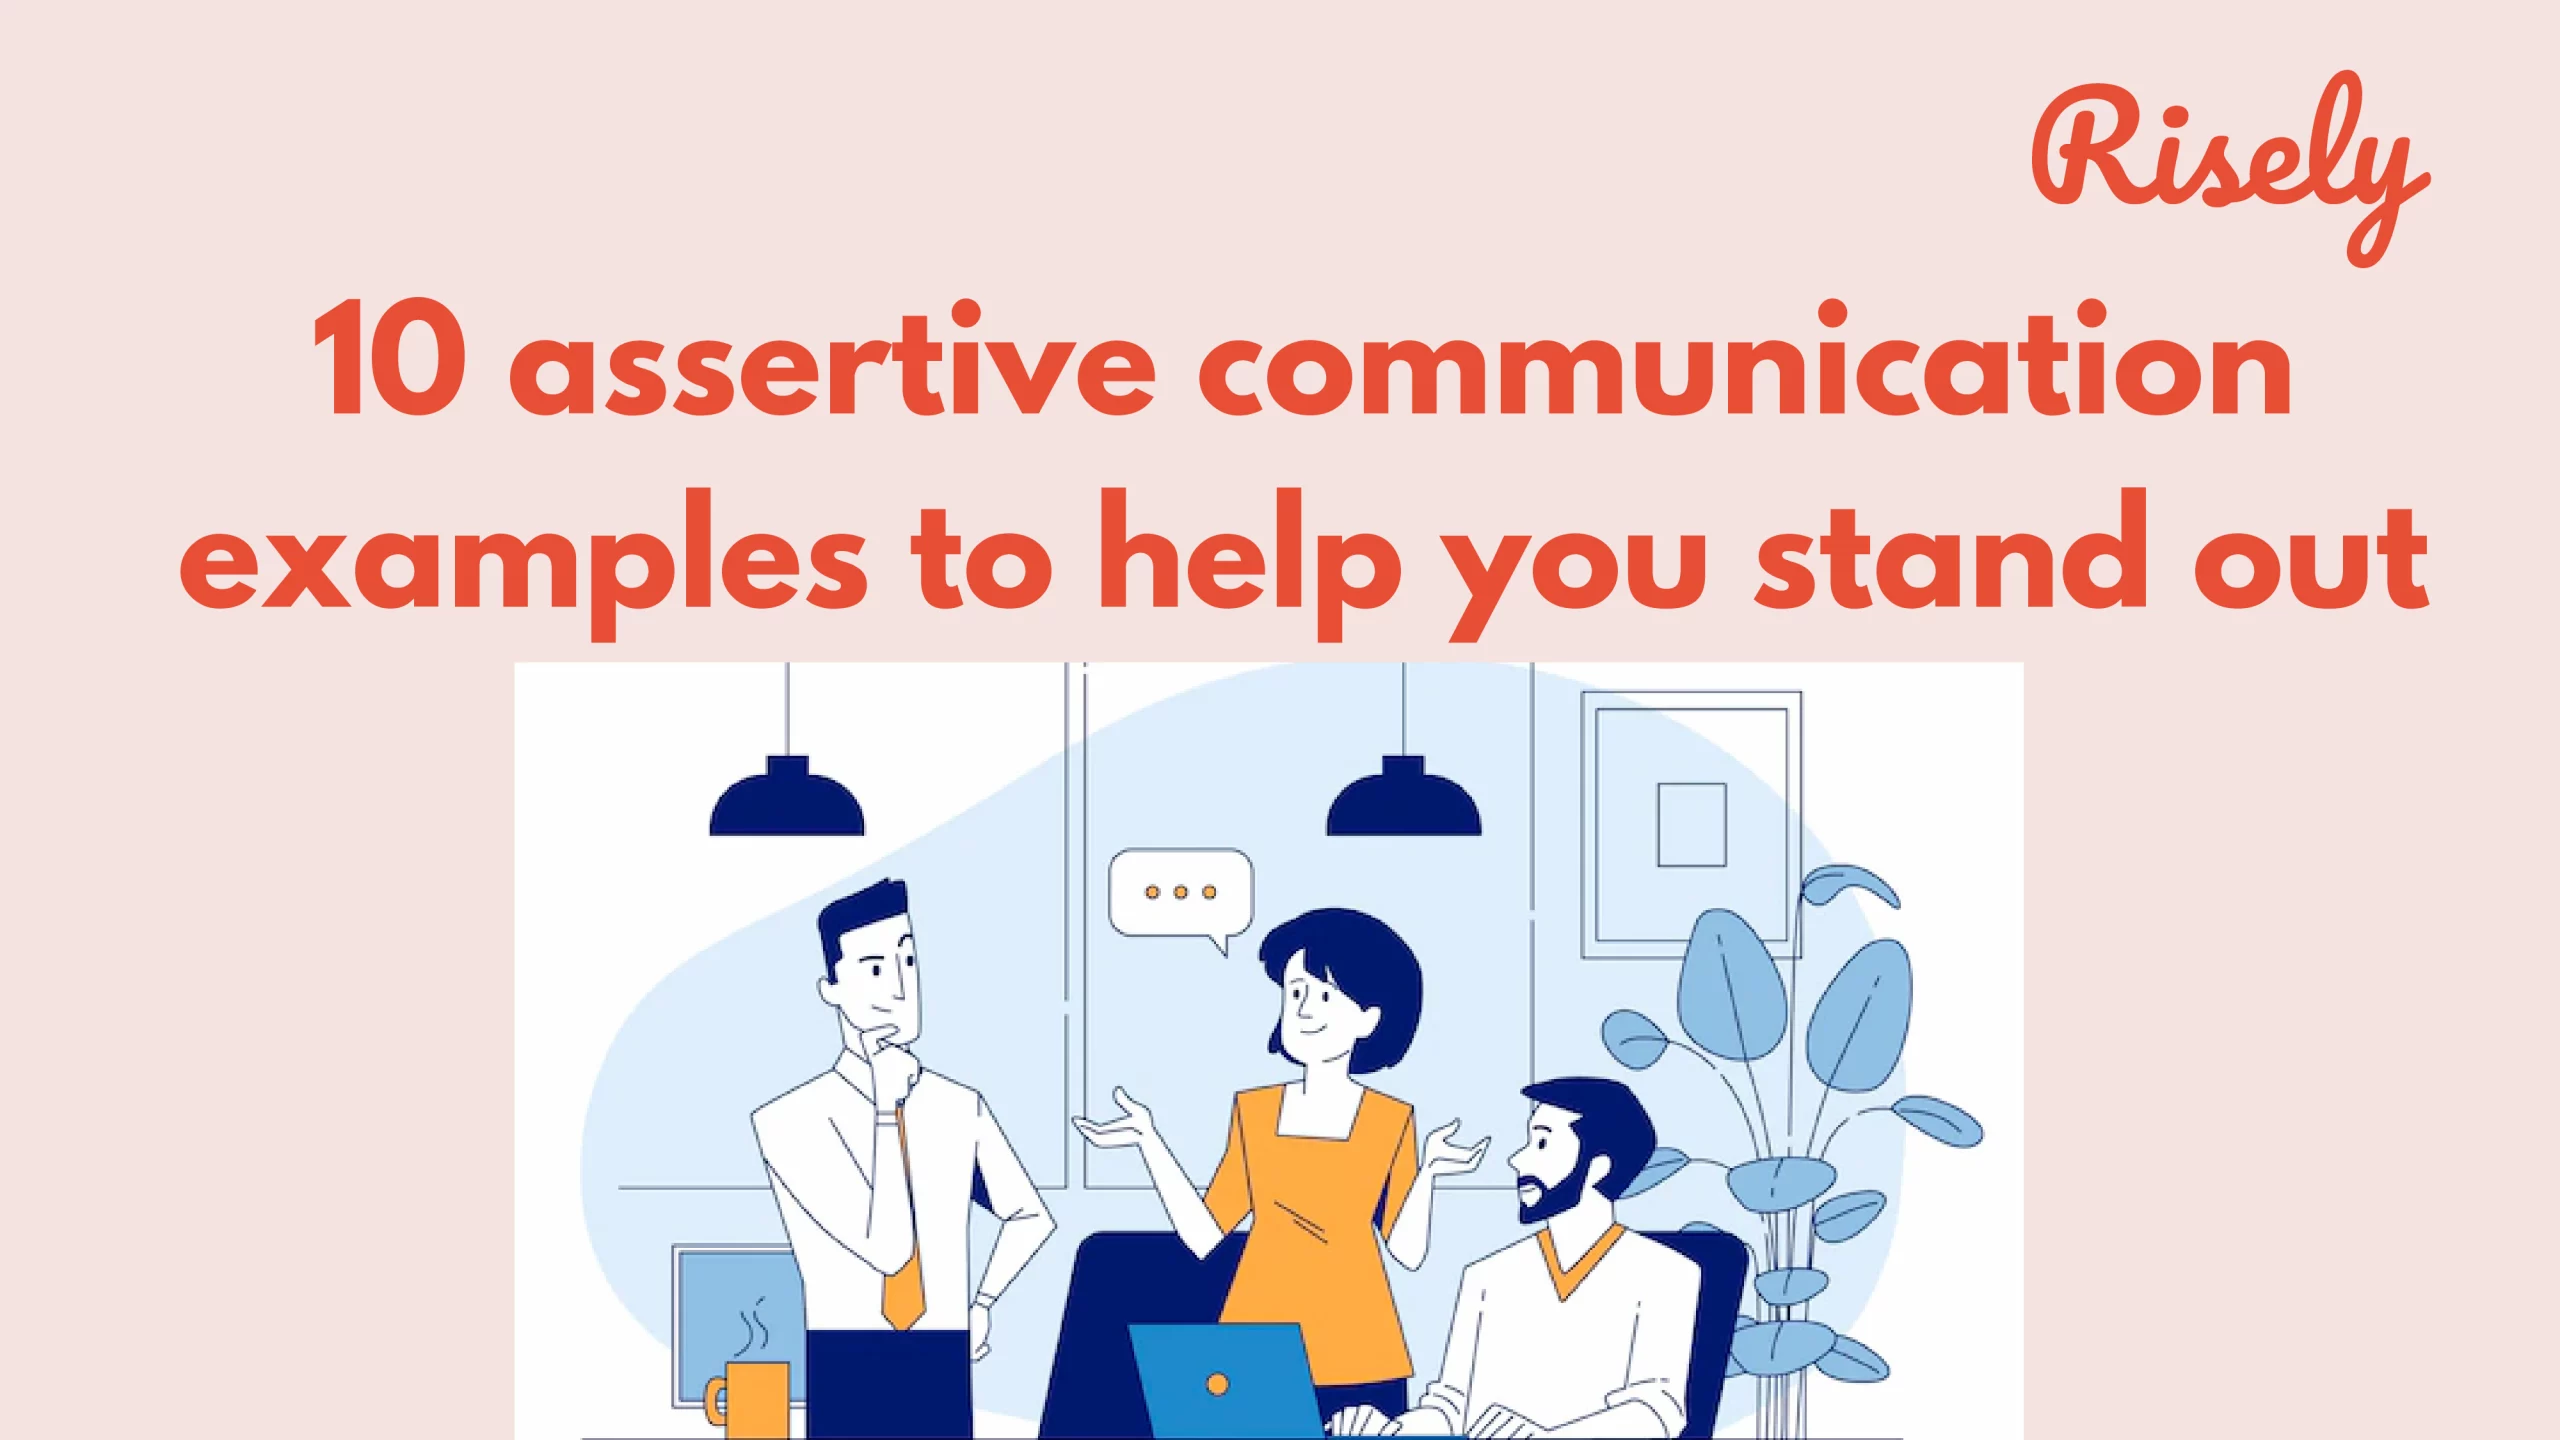 12 assertive communication examples to help you stand out